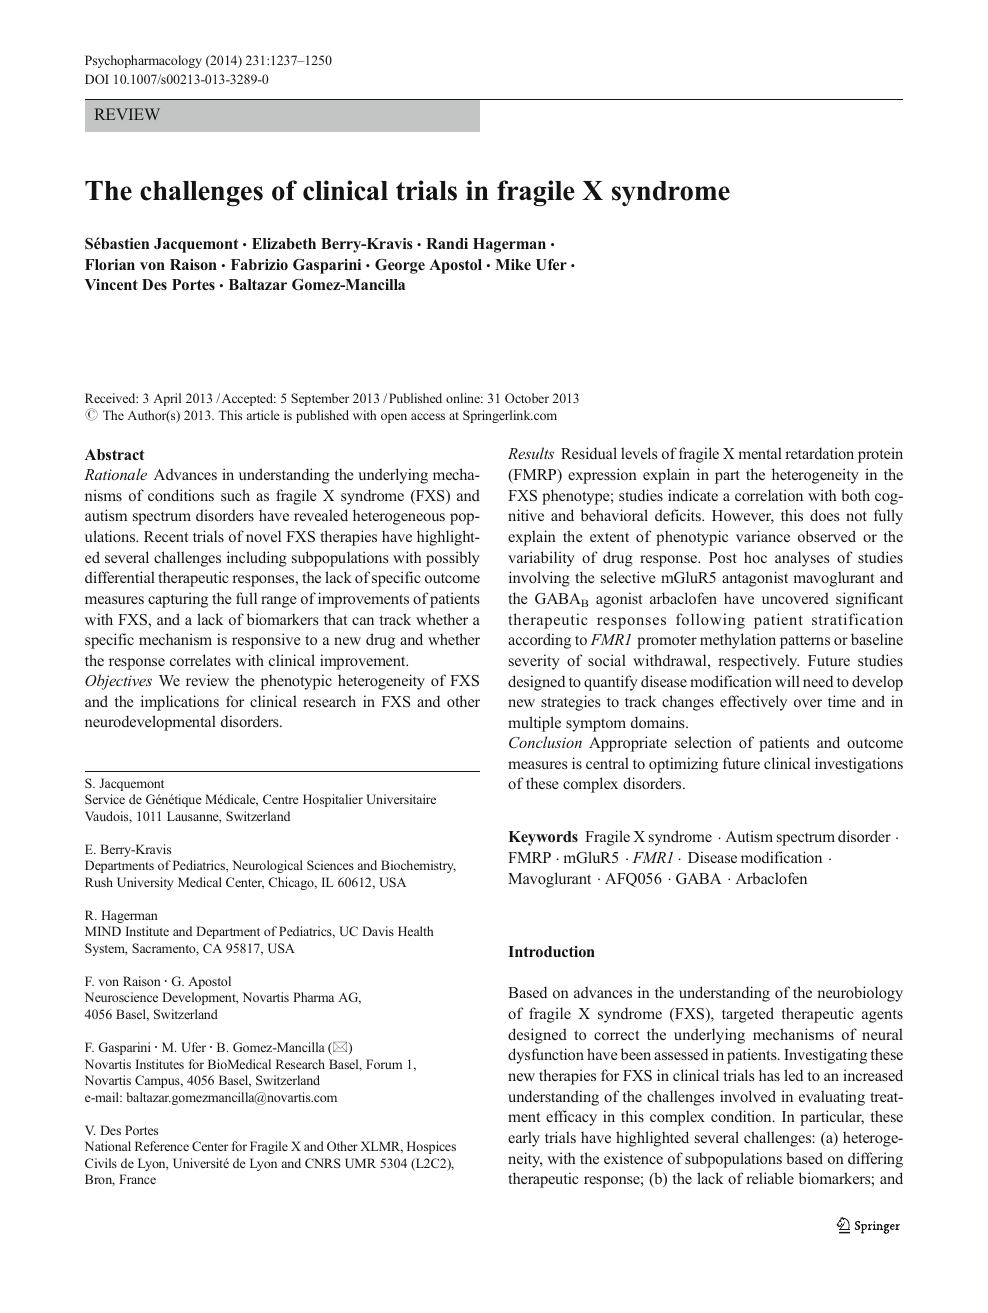 The Challenges Of Clinical Trials In Fragile X Syndrome Topic Of Research Paper In Clinical Medicine Download Scholarly Article Pdf And Read For Free On Cyberleninka Open Science Hub